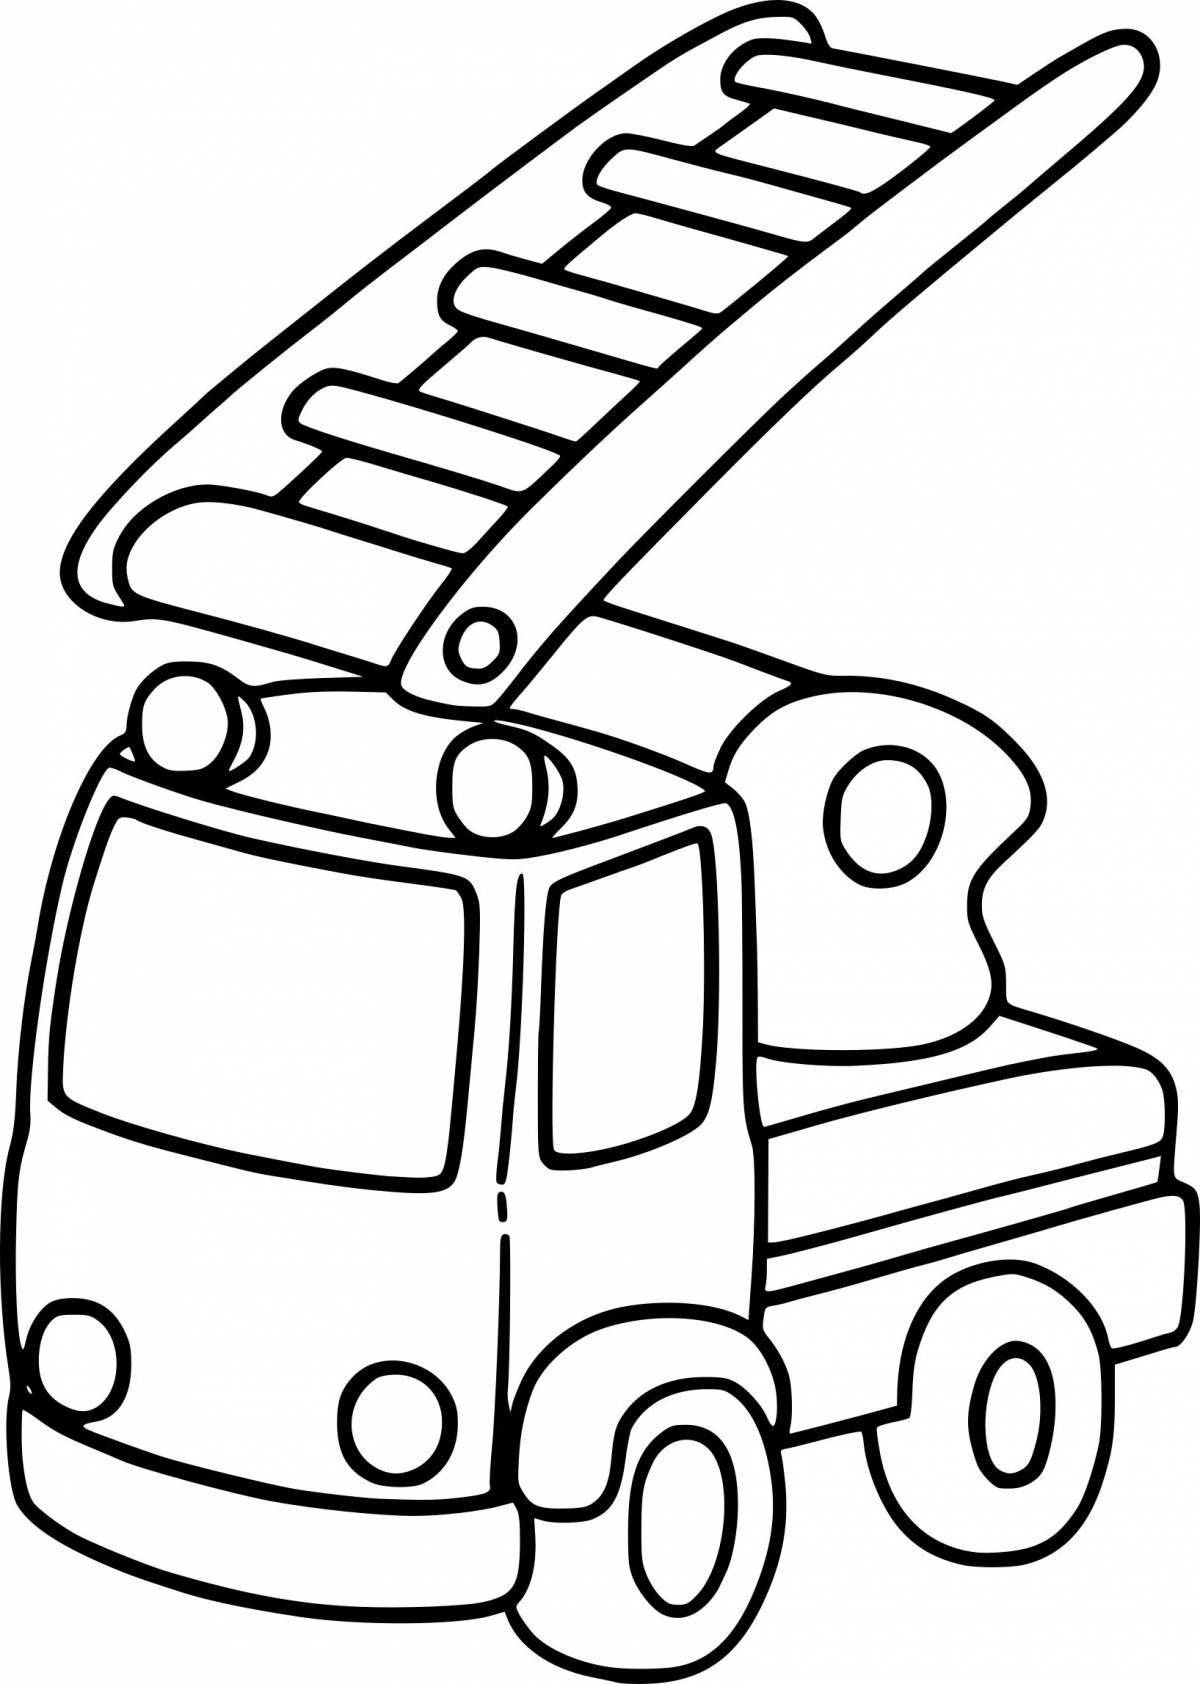 Adorable cars coloring book for 2 year olds